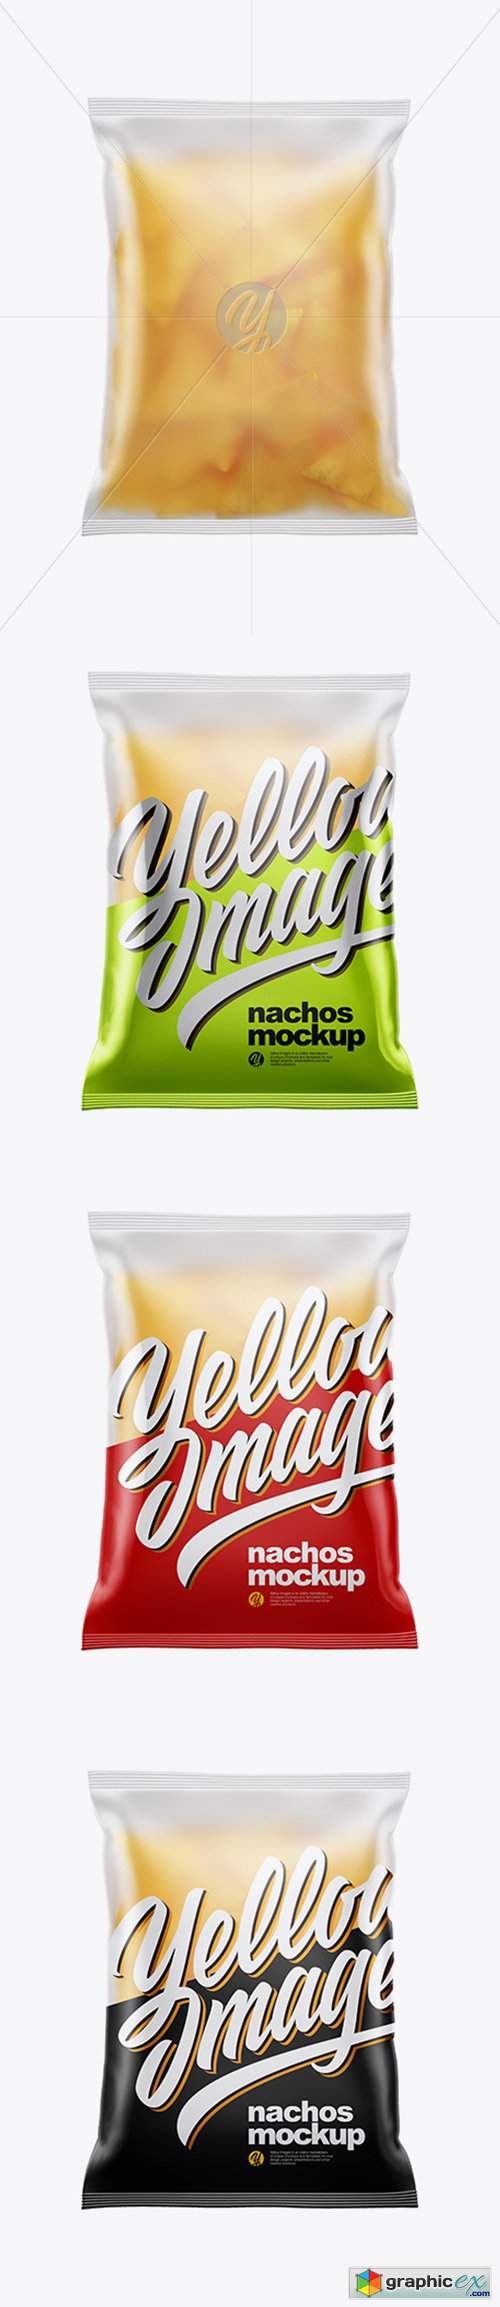 Frosted Bag With Nachos Mockup